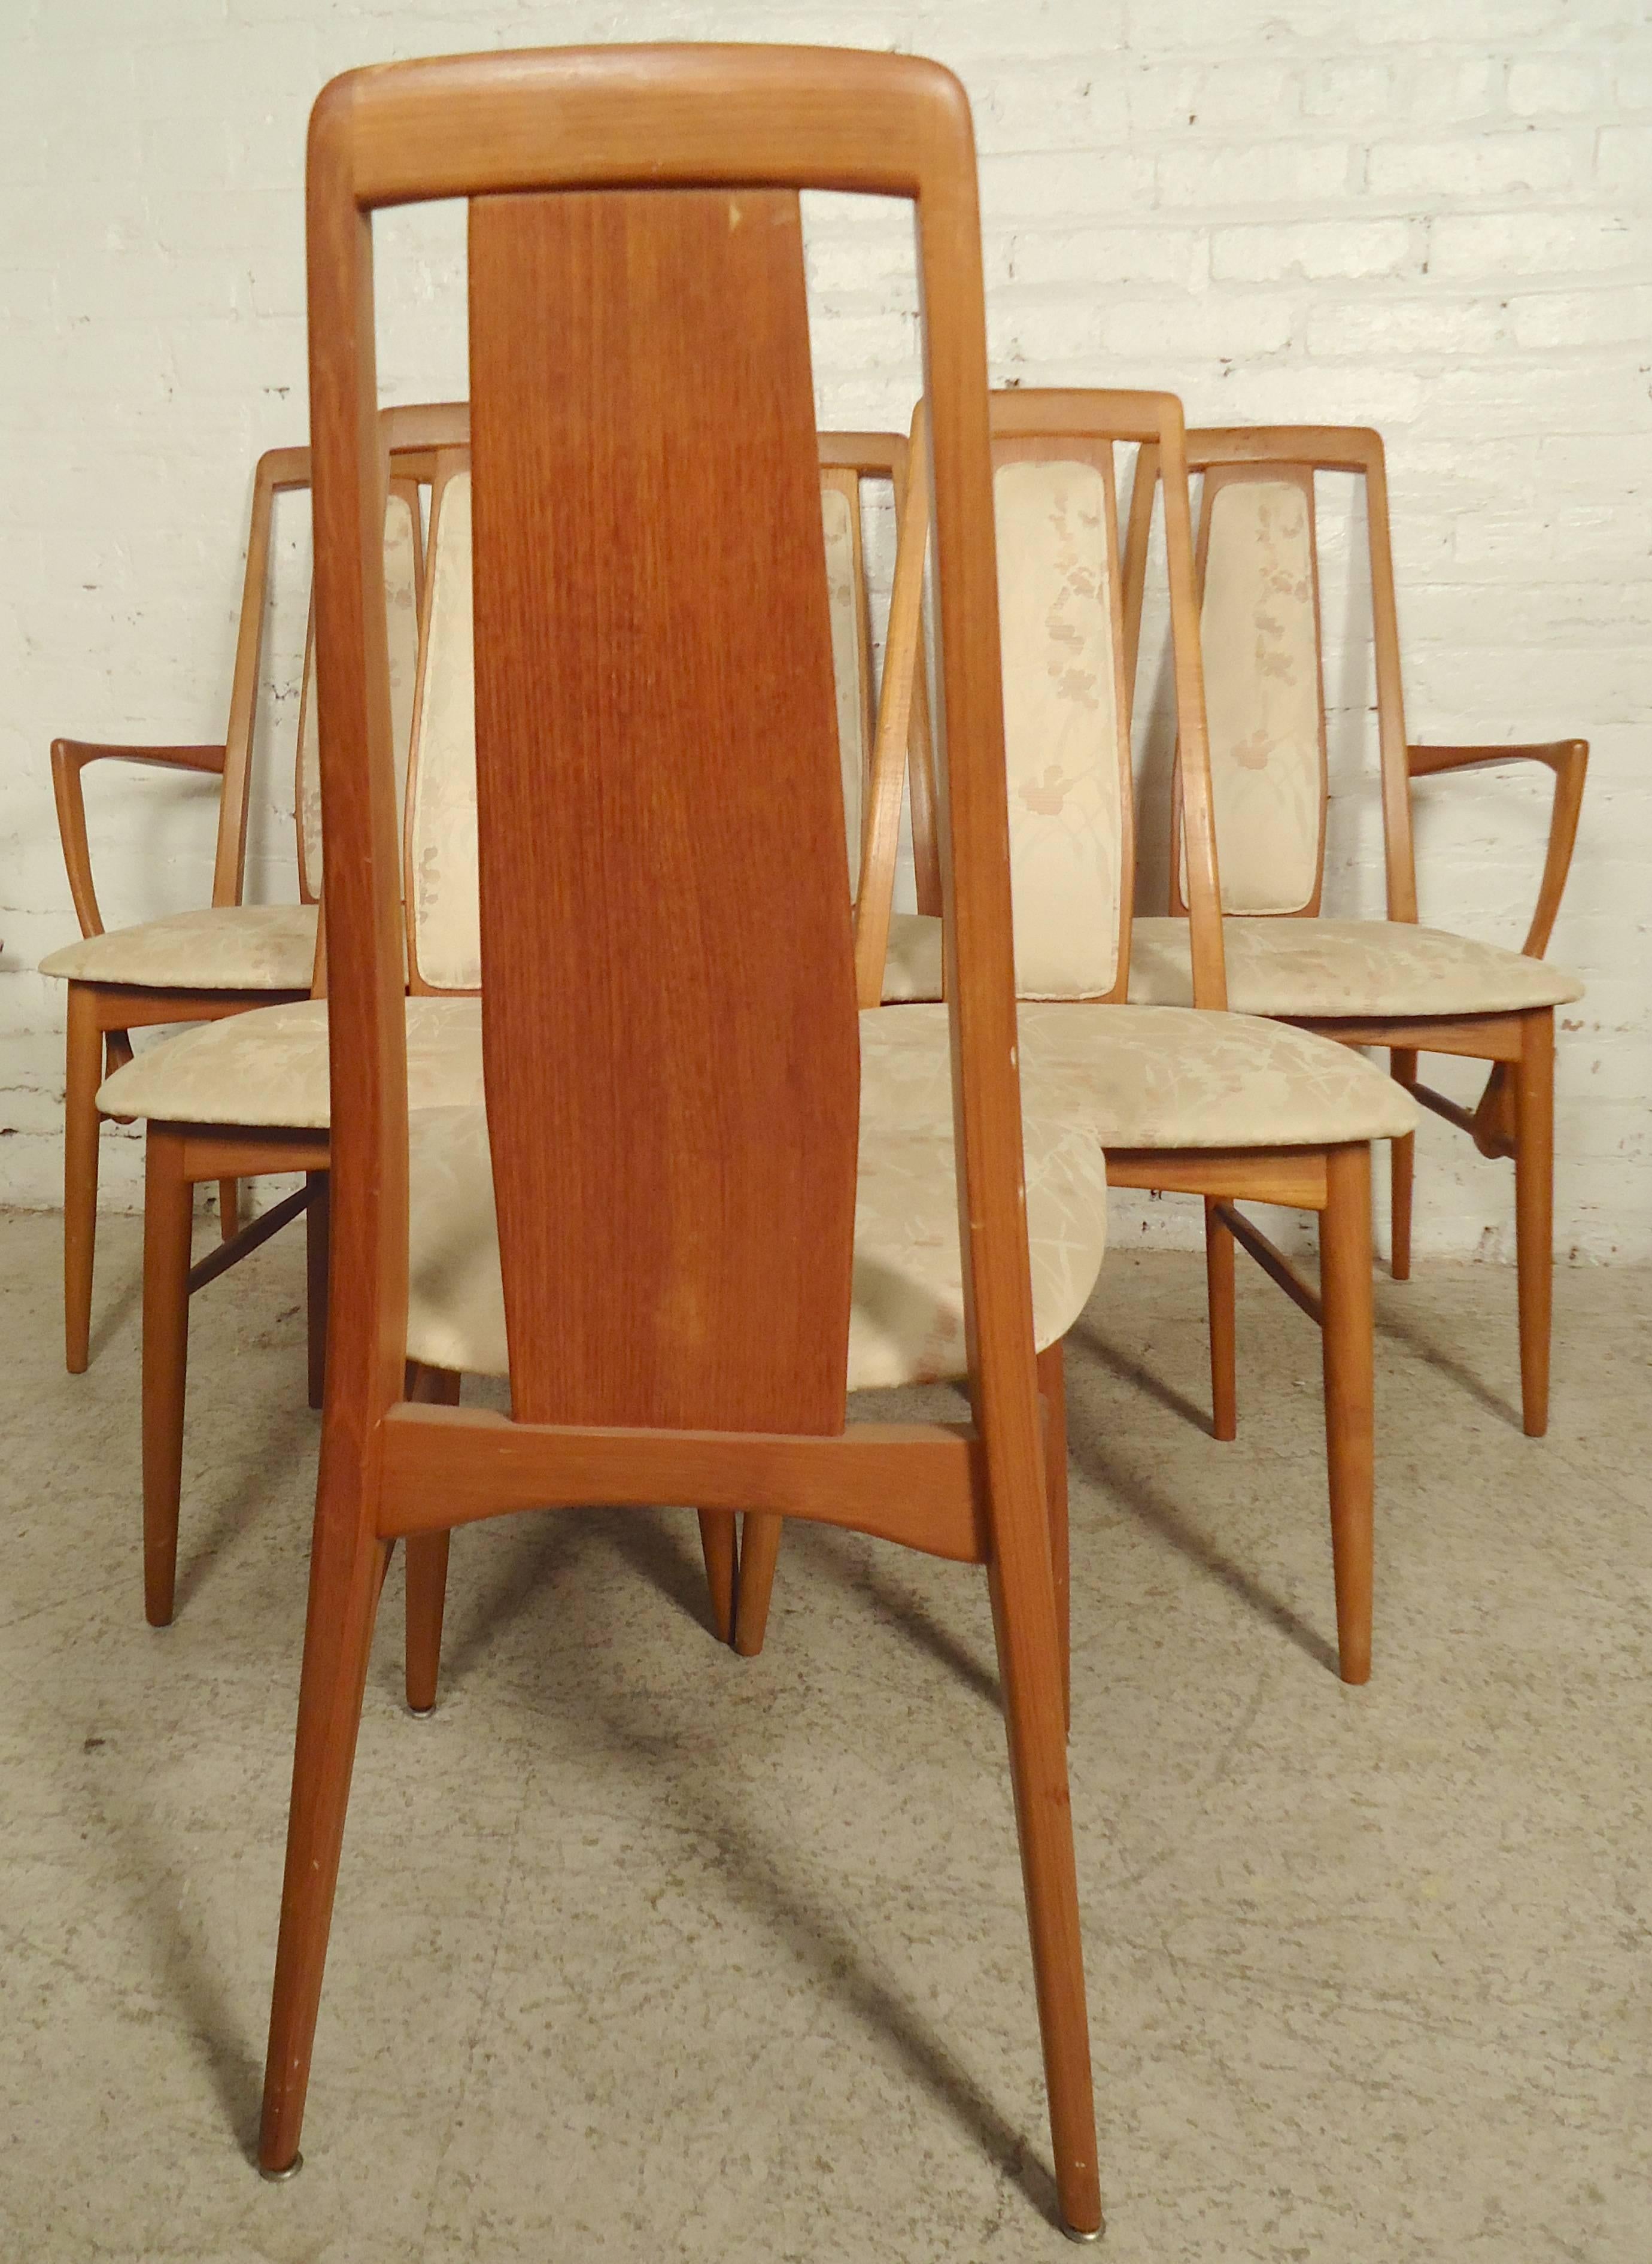 Set of Mid-Century Modern dining chairs designed by Niels Kofoed for Koefoeds Hornslet. Light teak wood frames, tapered legs, high backs, two armchairs.

(Please confirm item location NY or NJ with dealer).
       